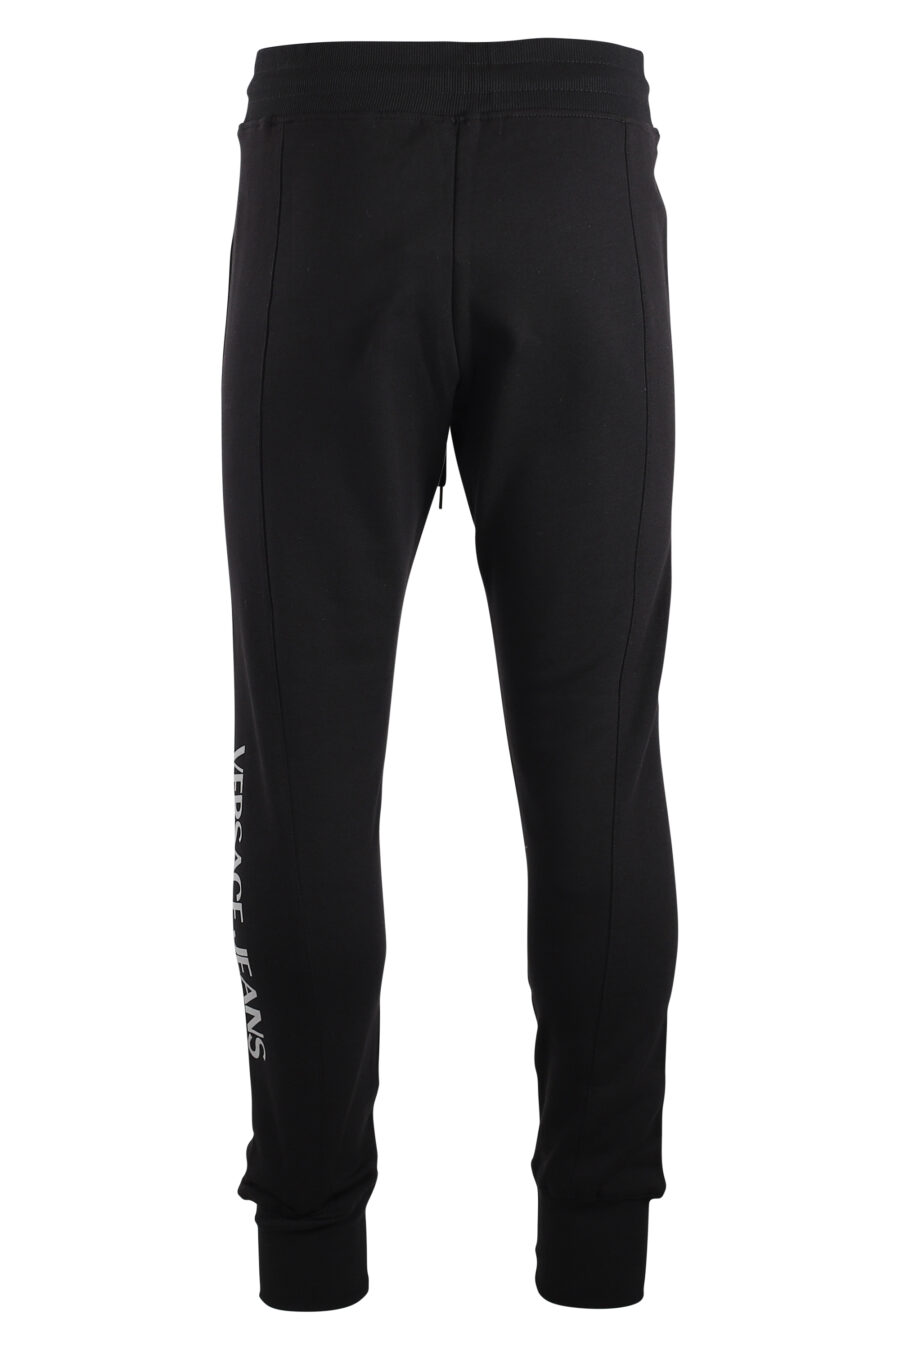 Tracksuit bottoms black with silver vertical logo - IMG 7503